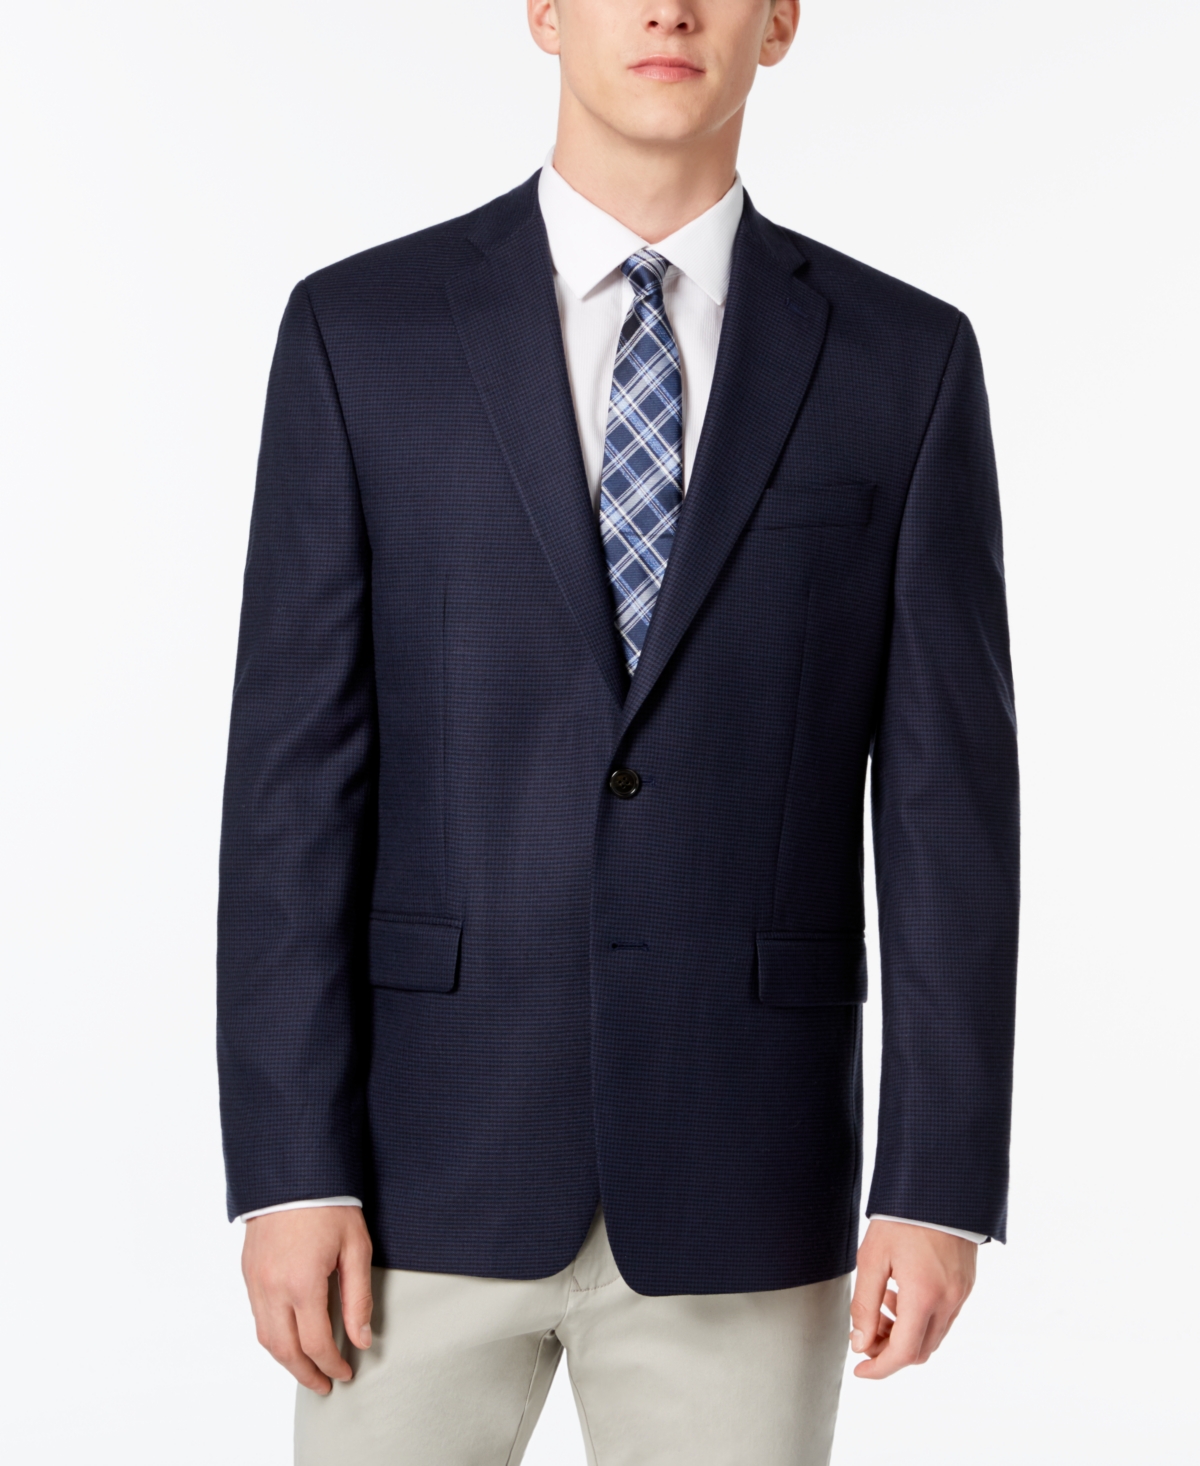 Difference Between Sport Coat And A Suit Jacket | lupon.gov.ph